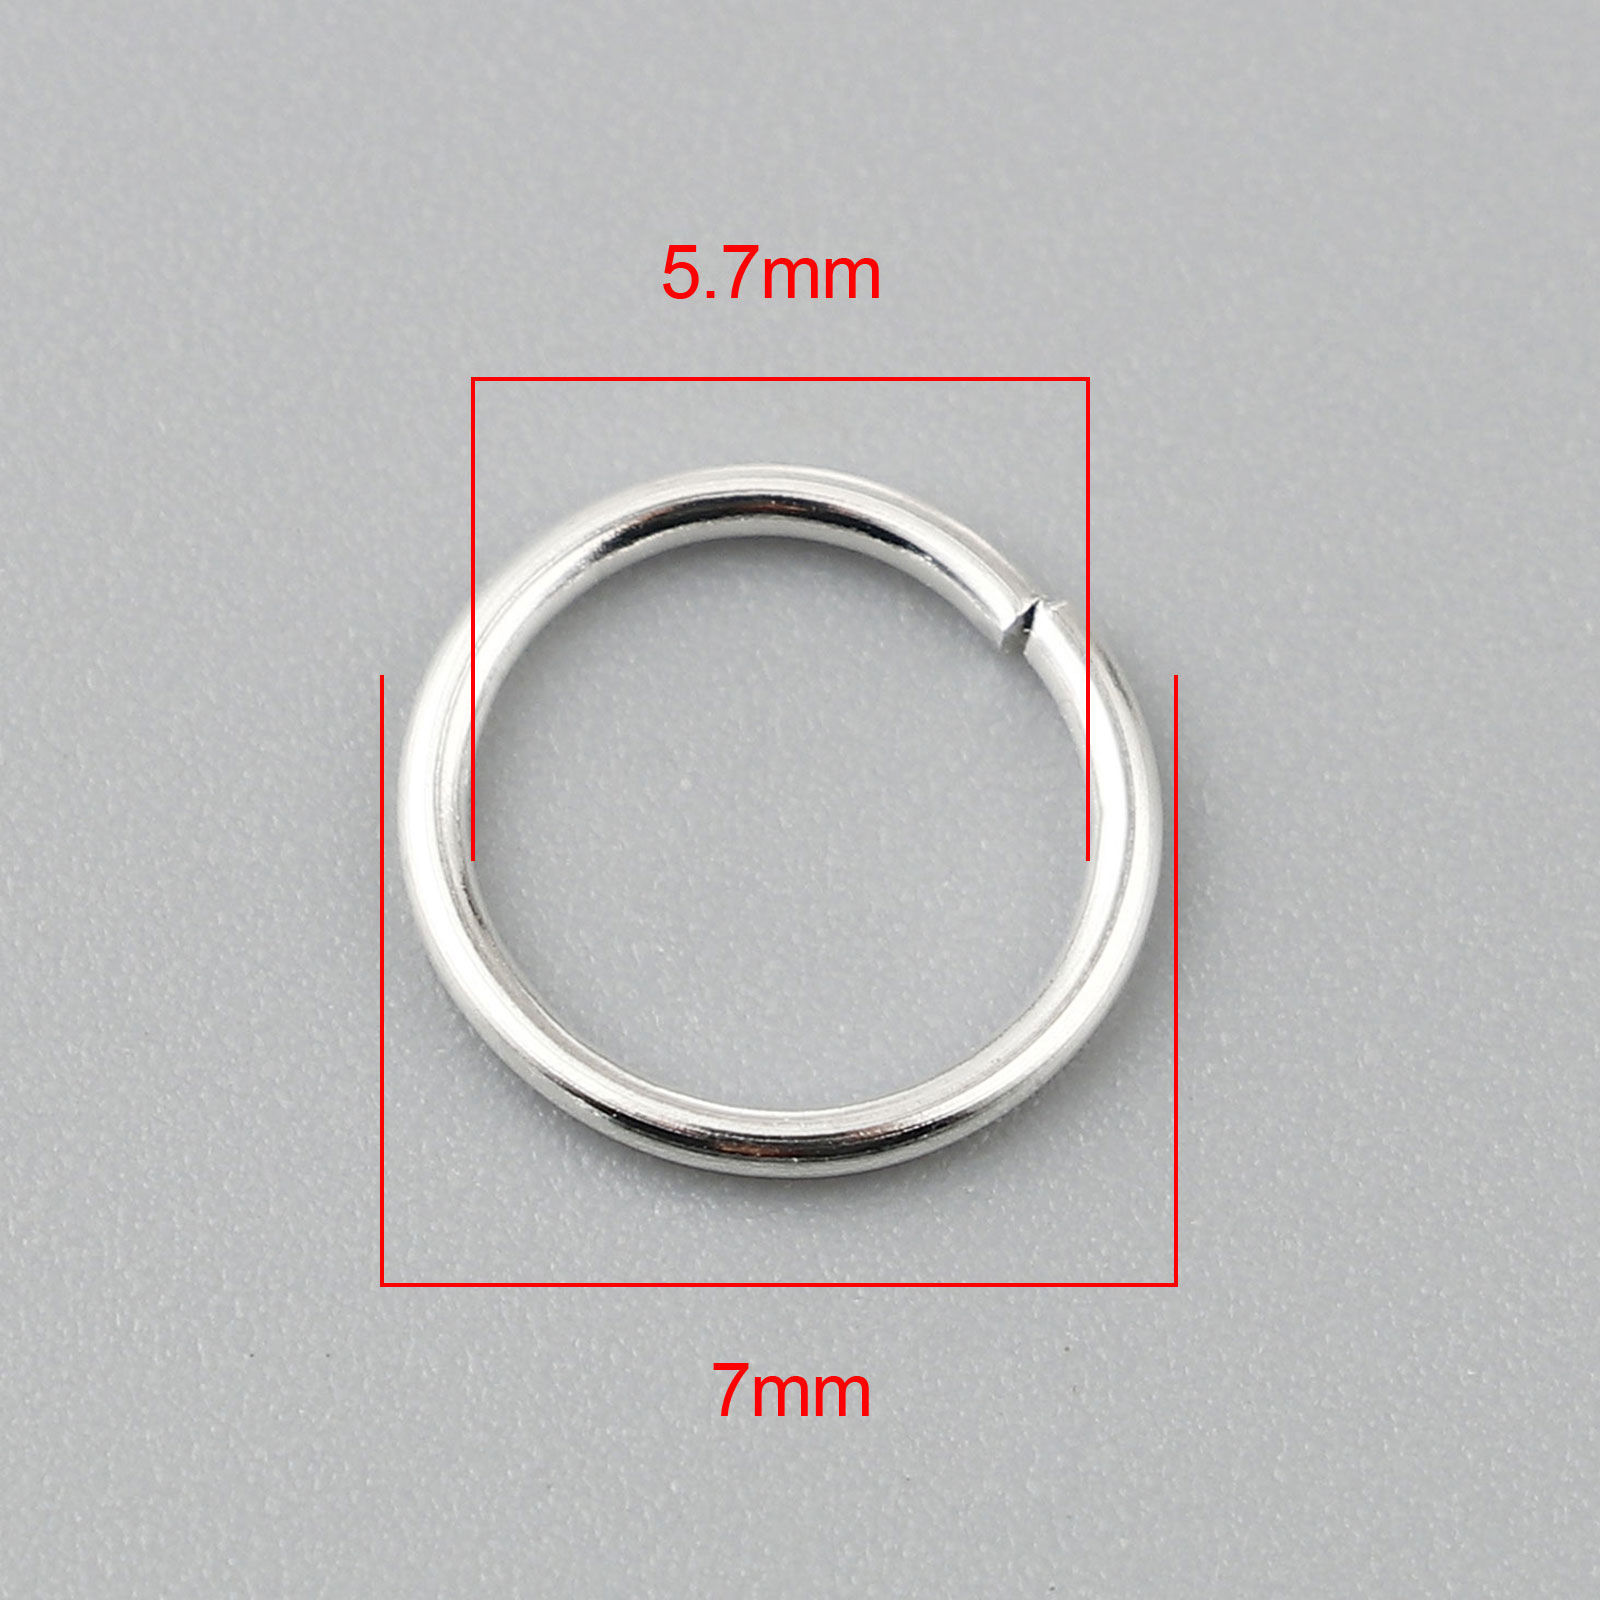 Picture of 0.7mm Iron Based Alloy Open Jump Rings Findings Circle Ring Silver Plated 7mm Dia, 200 PCs